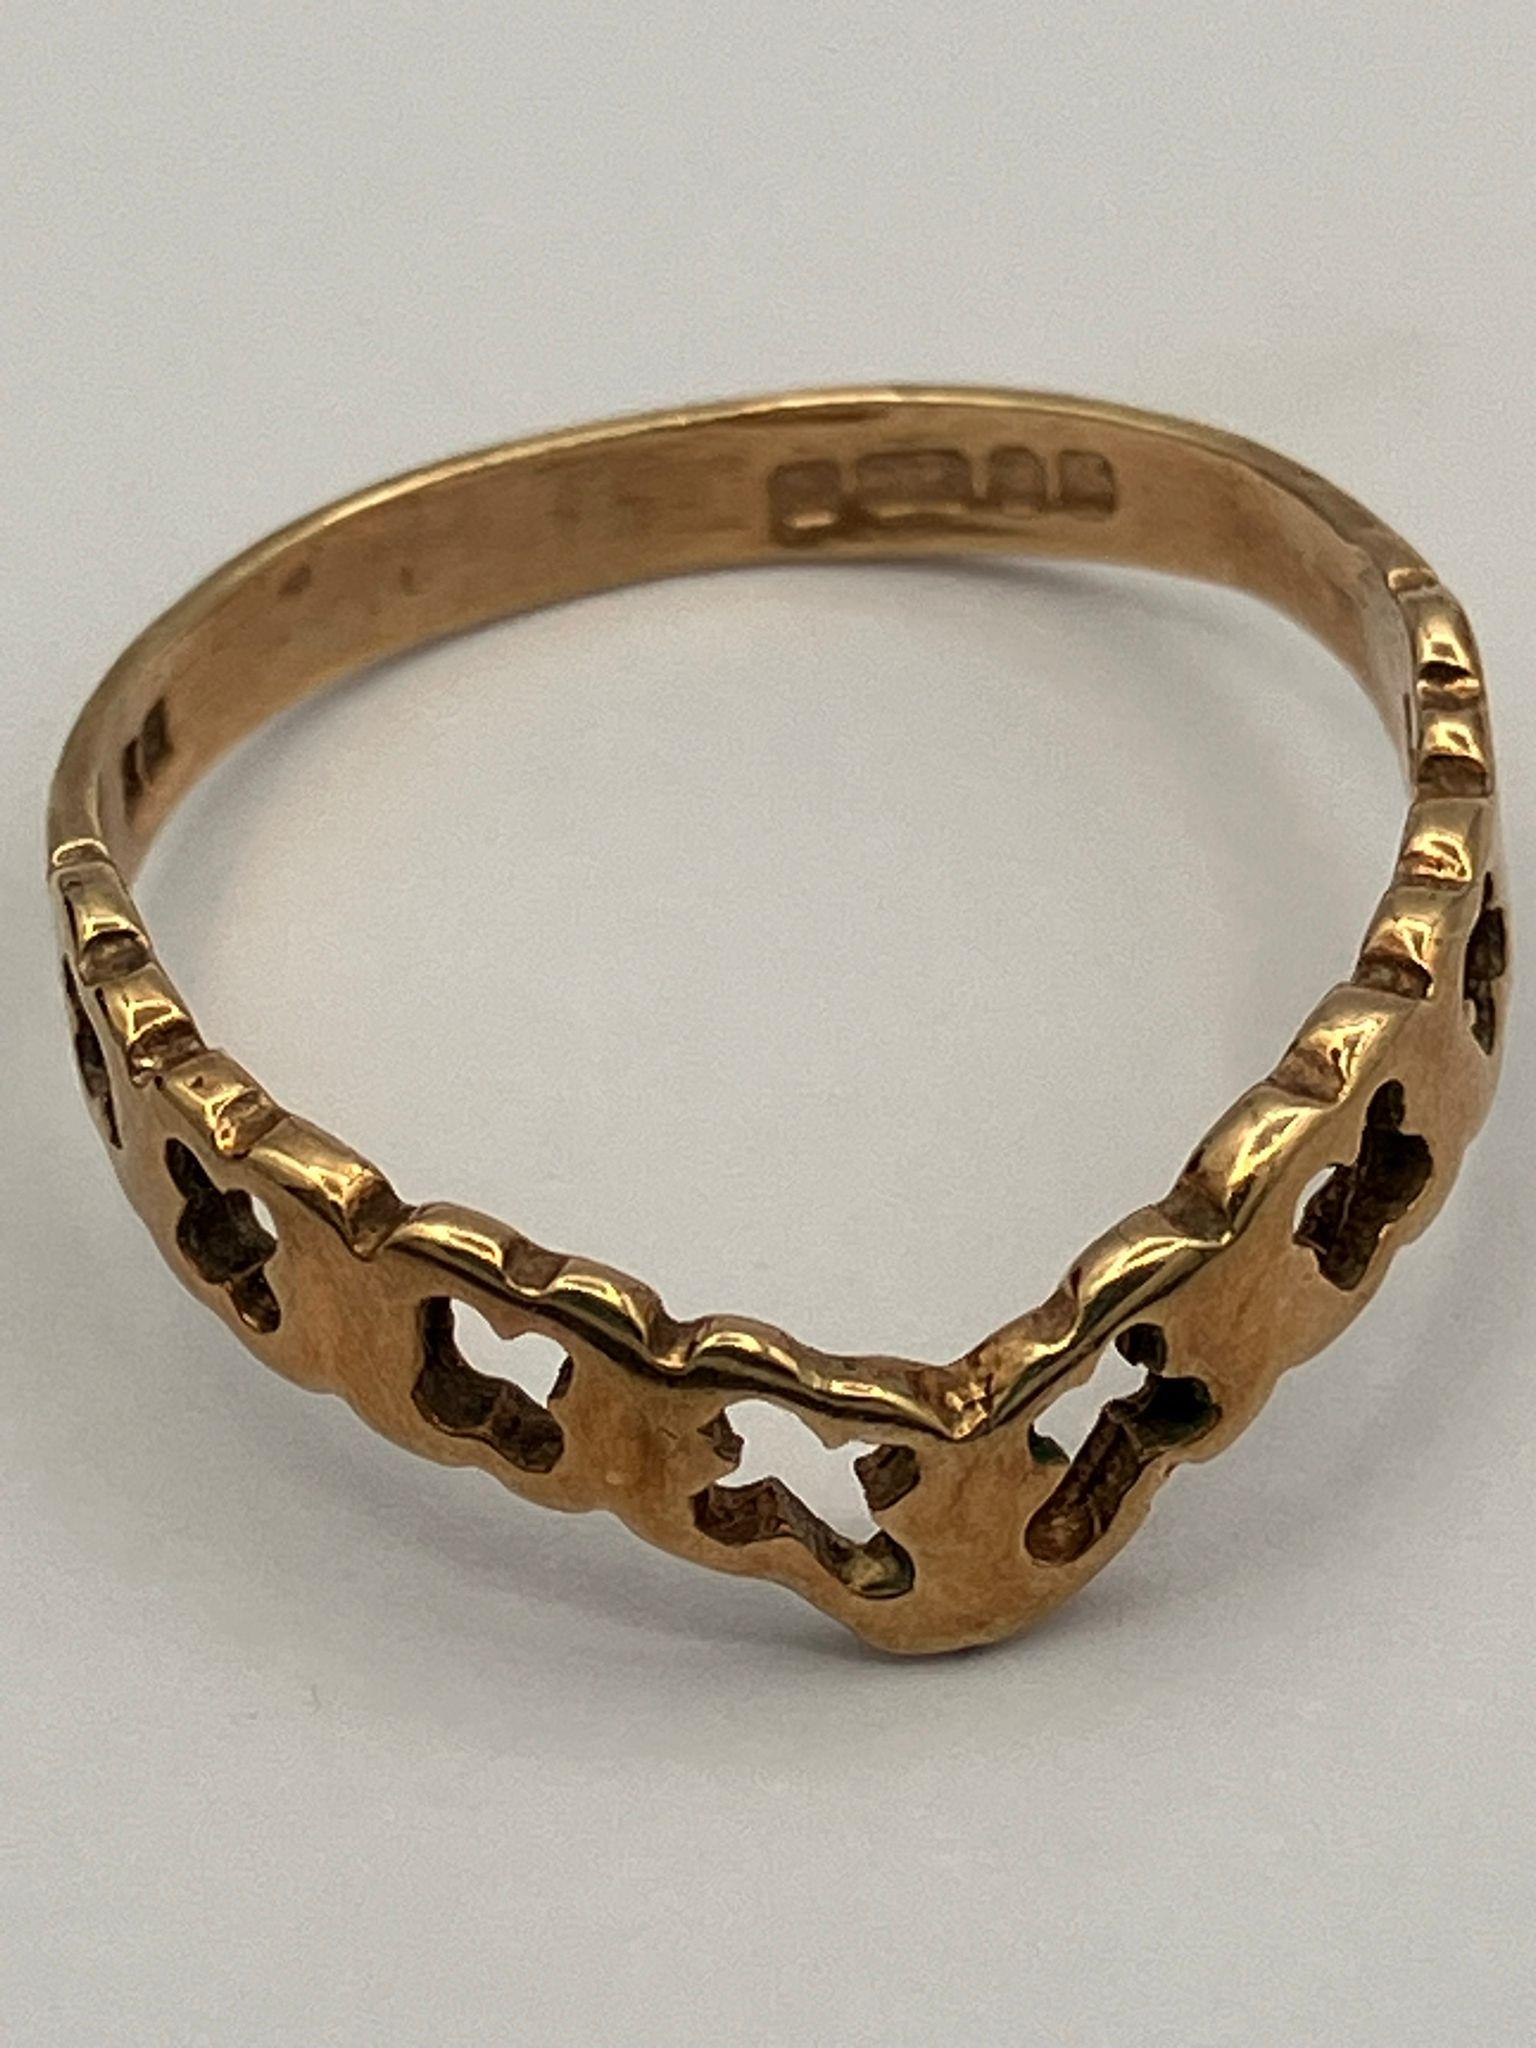 9 carat GOLD WISHBONE RING. Full UK hallmark. Attractive cut out design. Complete with ring box. 1.2